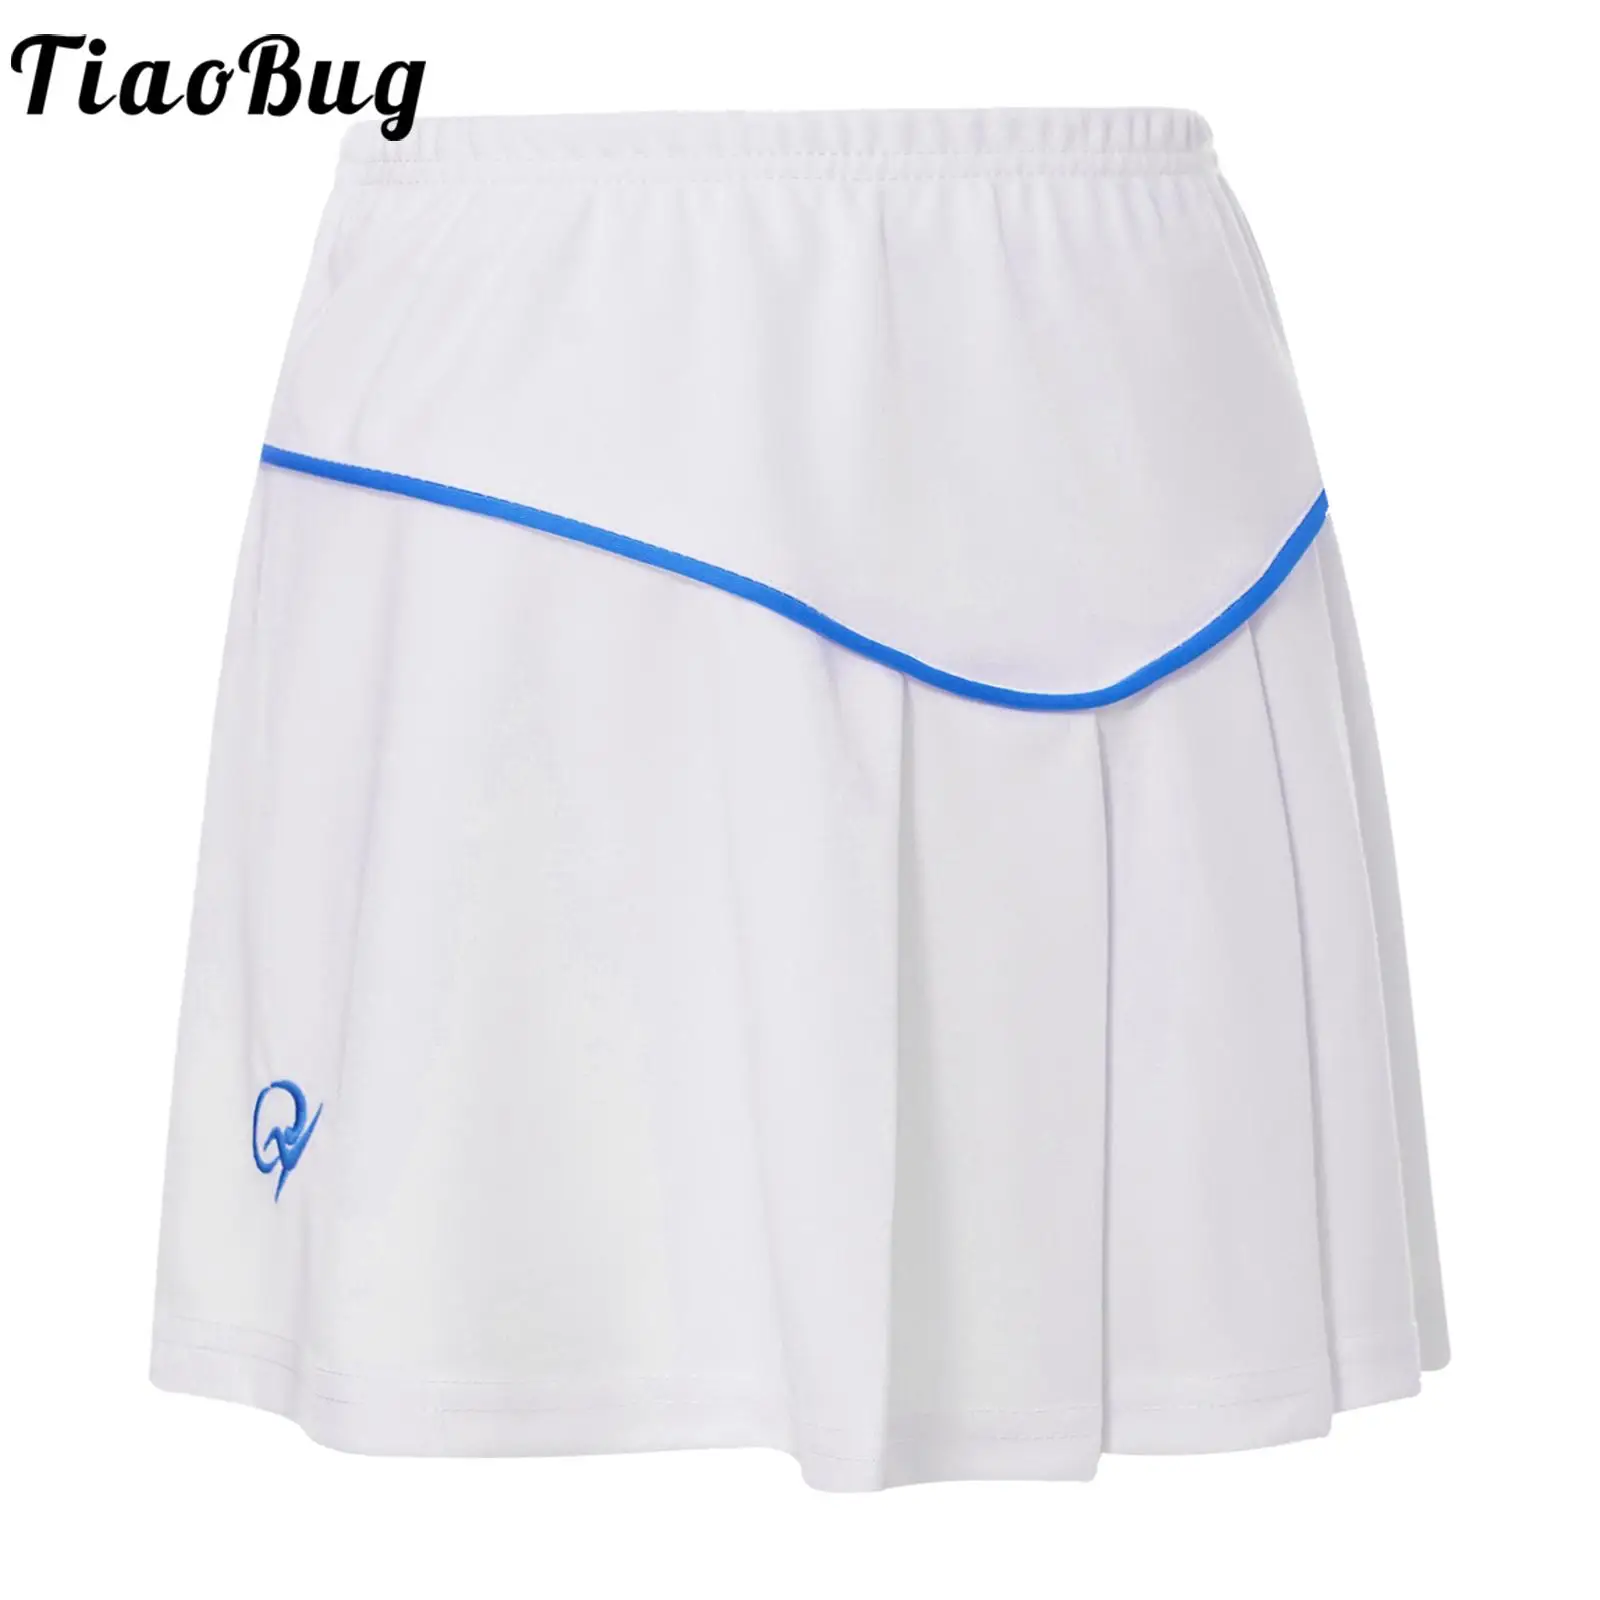 

Fashion Kids Girls Sport Skirt A-line Pleated Active Skirt with Built-in Shorts for Jogging Gymnastic Golf Tennis Badminton